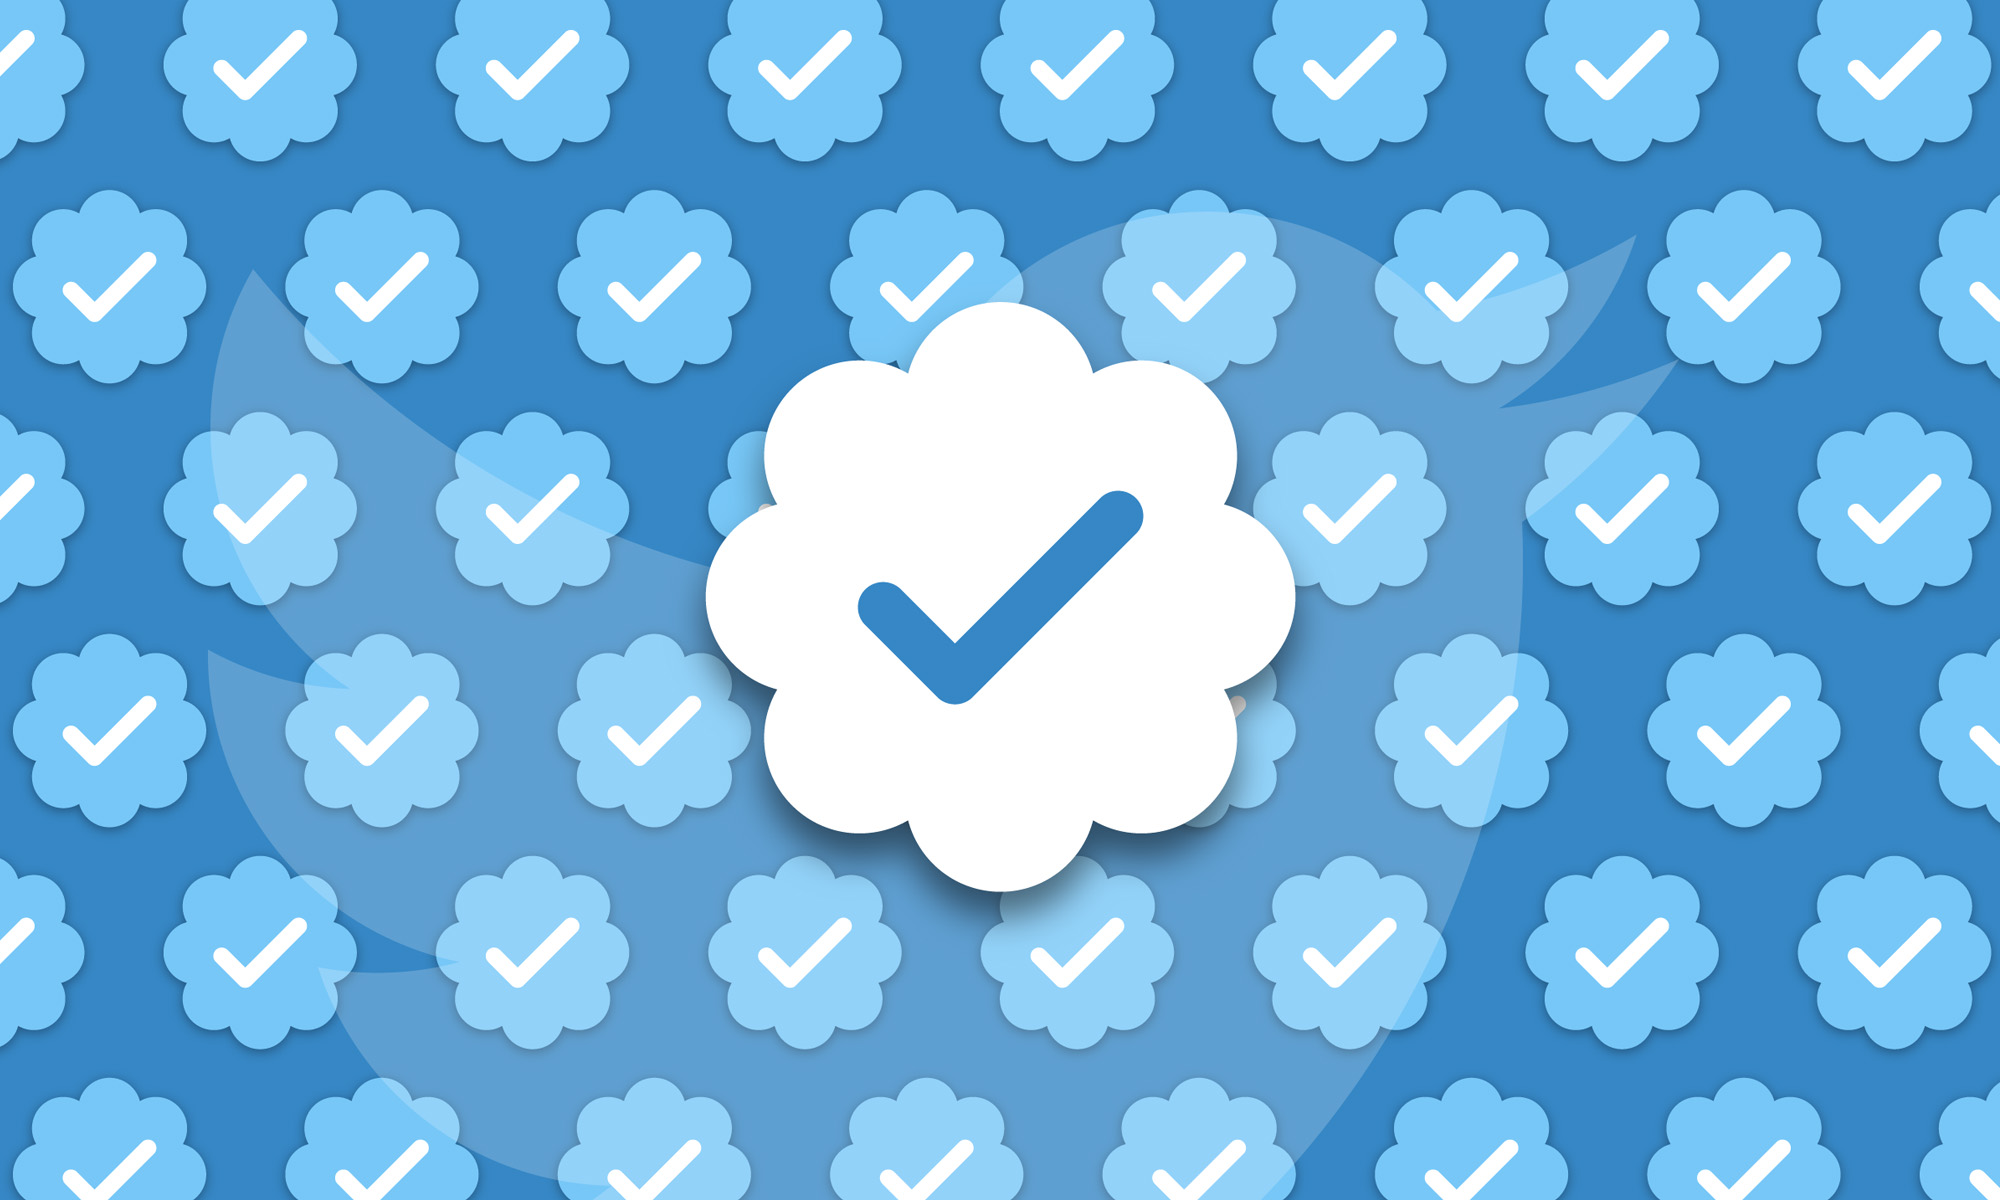 twitter's verification badge is now available to the public